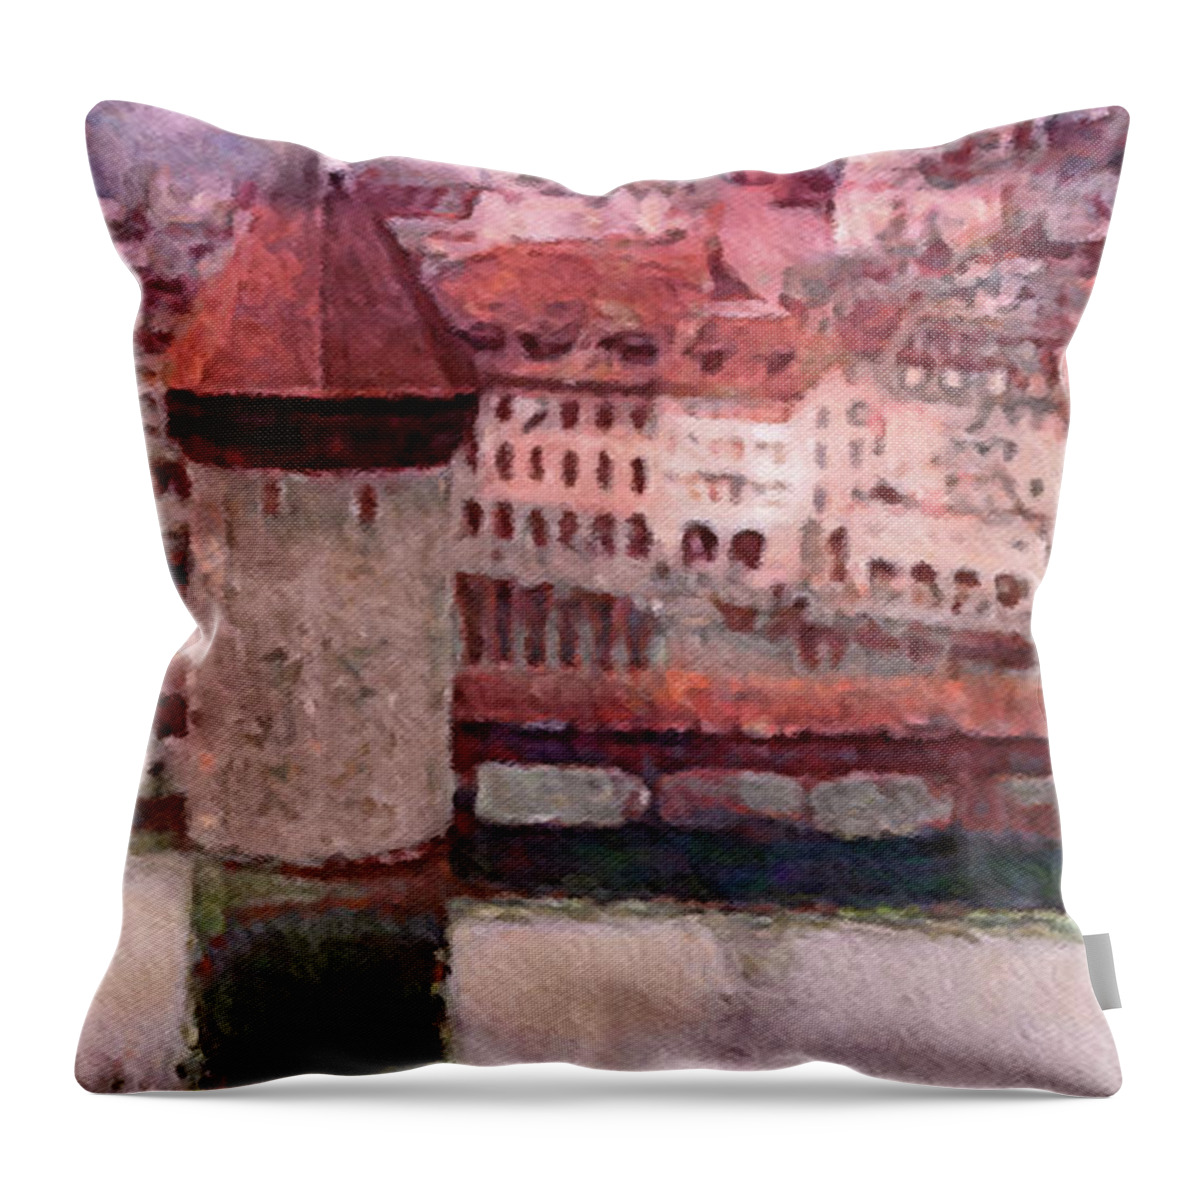 Lovely Lake Lucerne Throw Pillow featuring the digital art Lovely Lake Lucerne by Susan Maxwell Schmidt